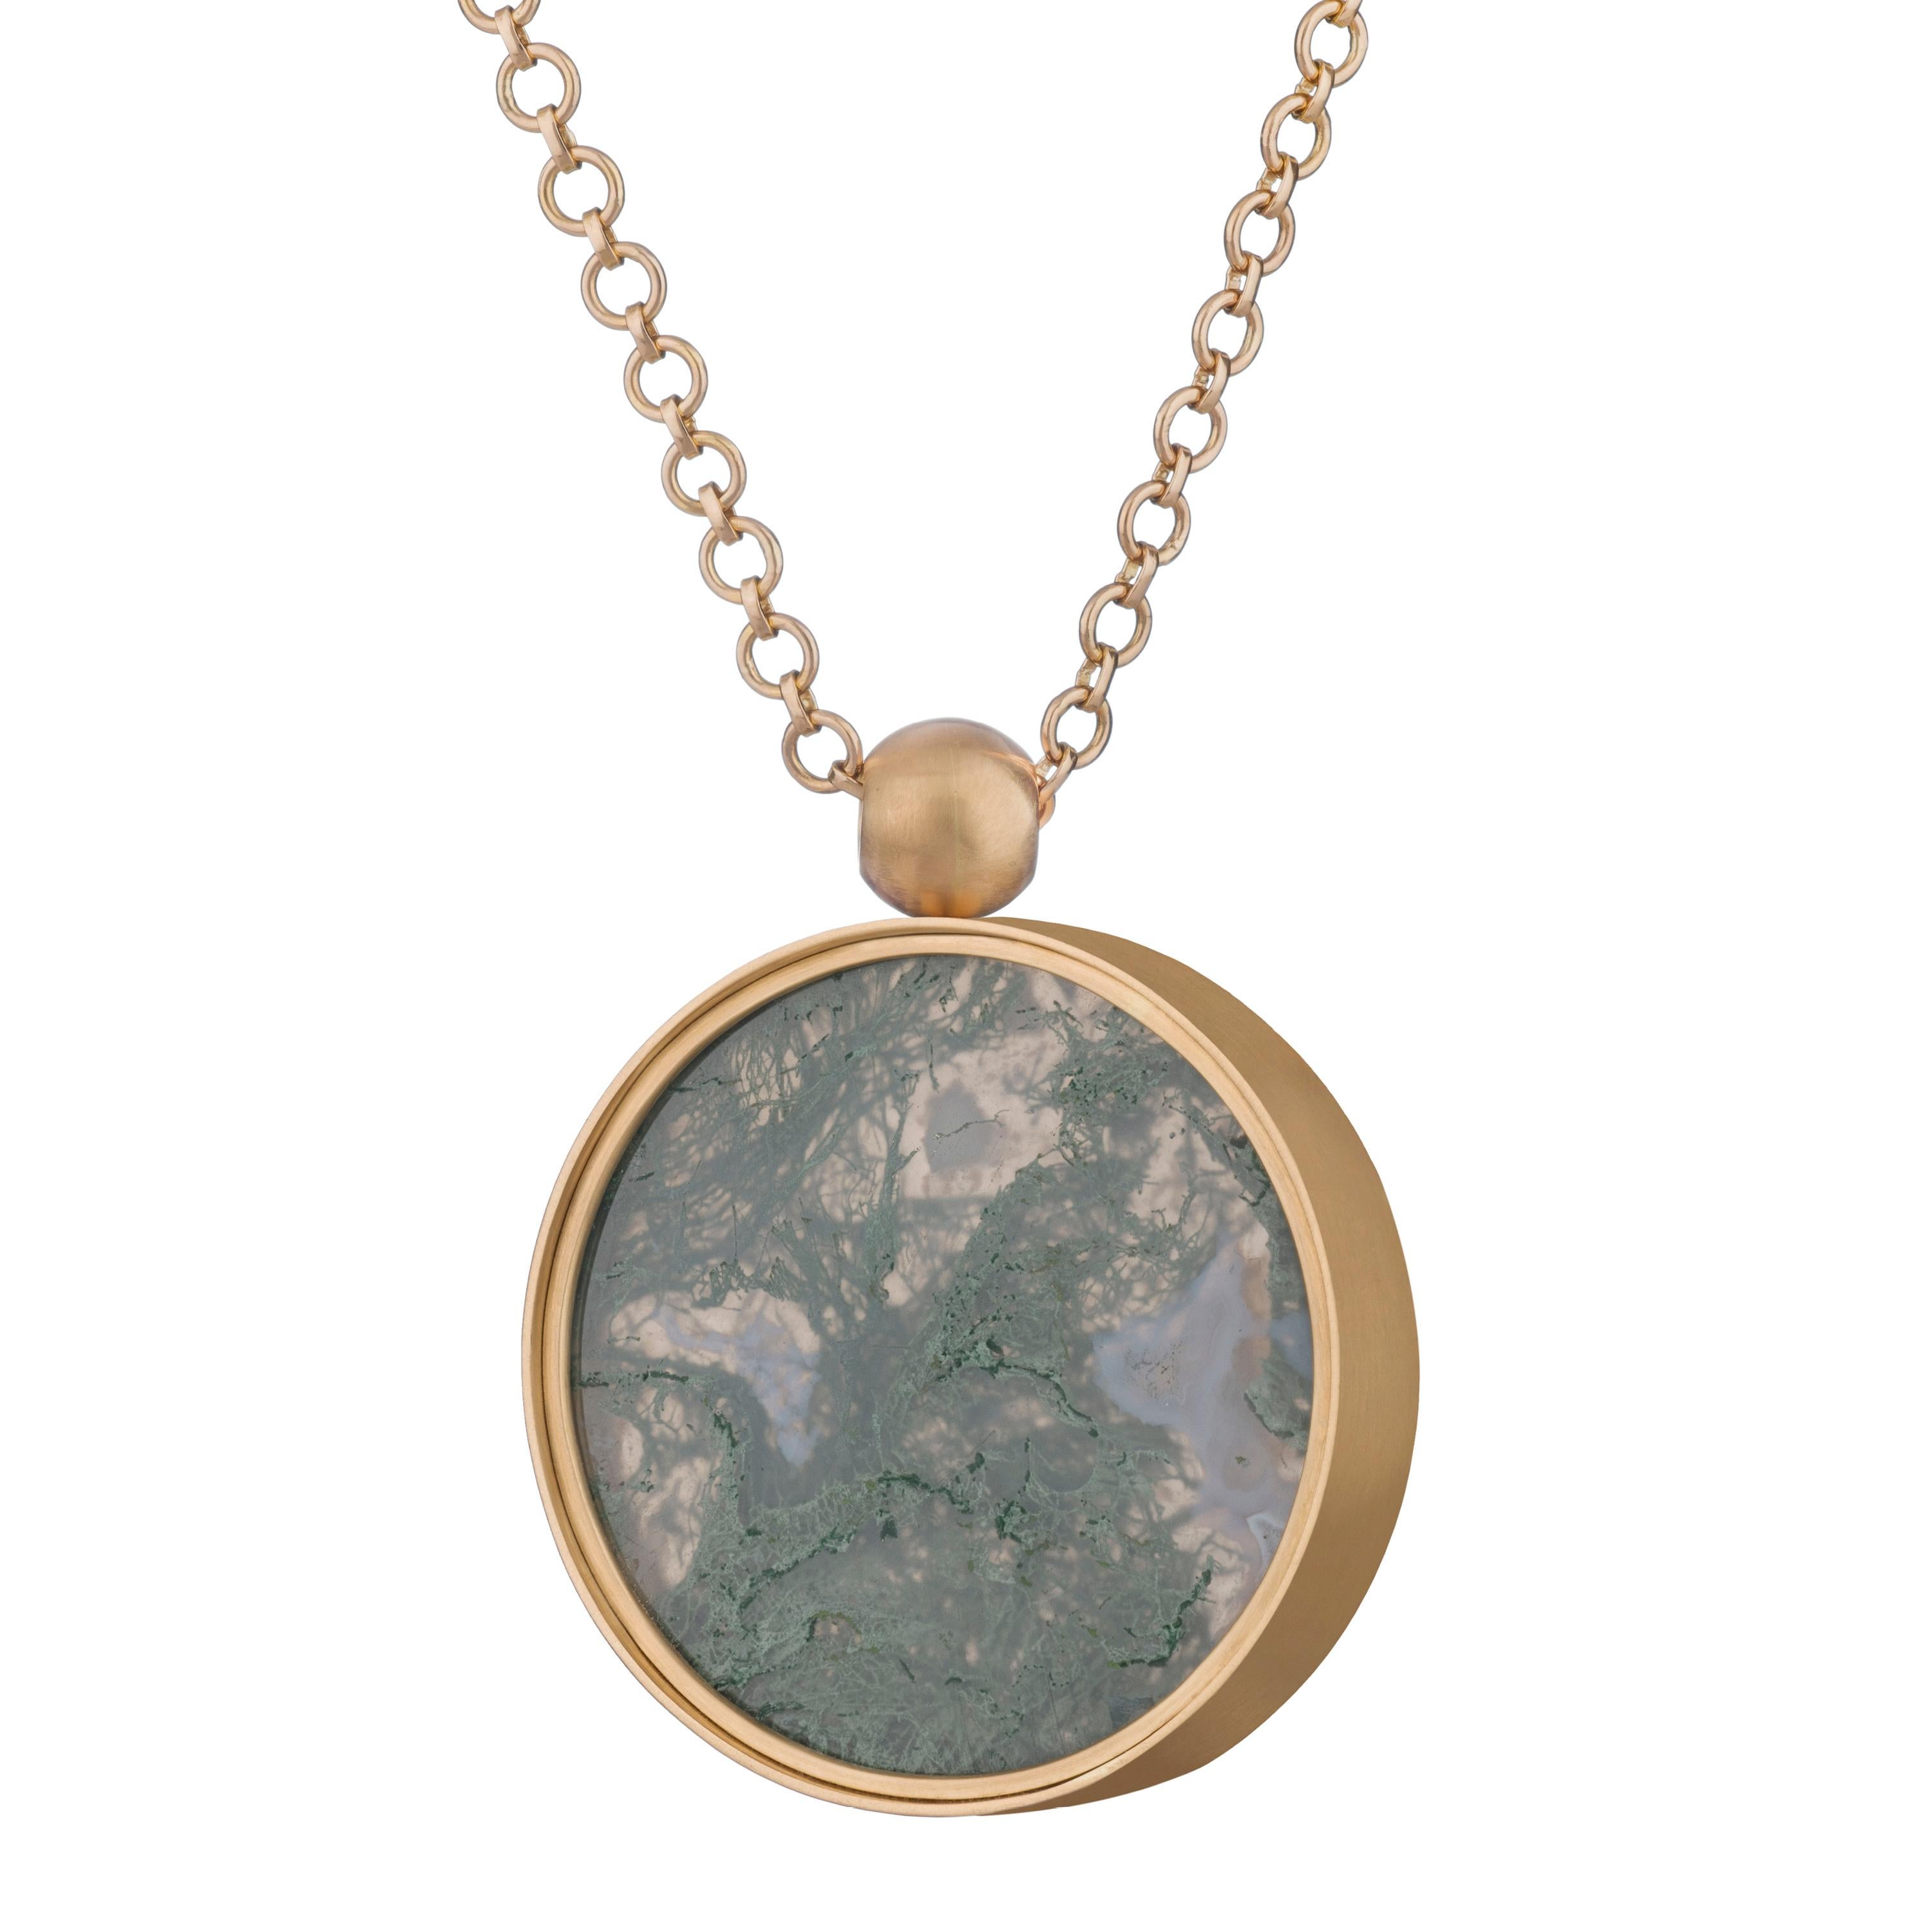 Ouroboros moss agate swivel pendant necklace set in 18 karat gold on a handmade 18 karat gold chain, with an 18 karat gold Ouroboros lasered ball to finish the back. 

This is part of the 'Any Colour You Like' (the founder's favourite track from the